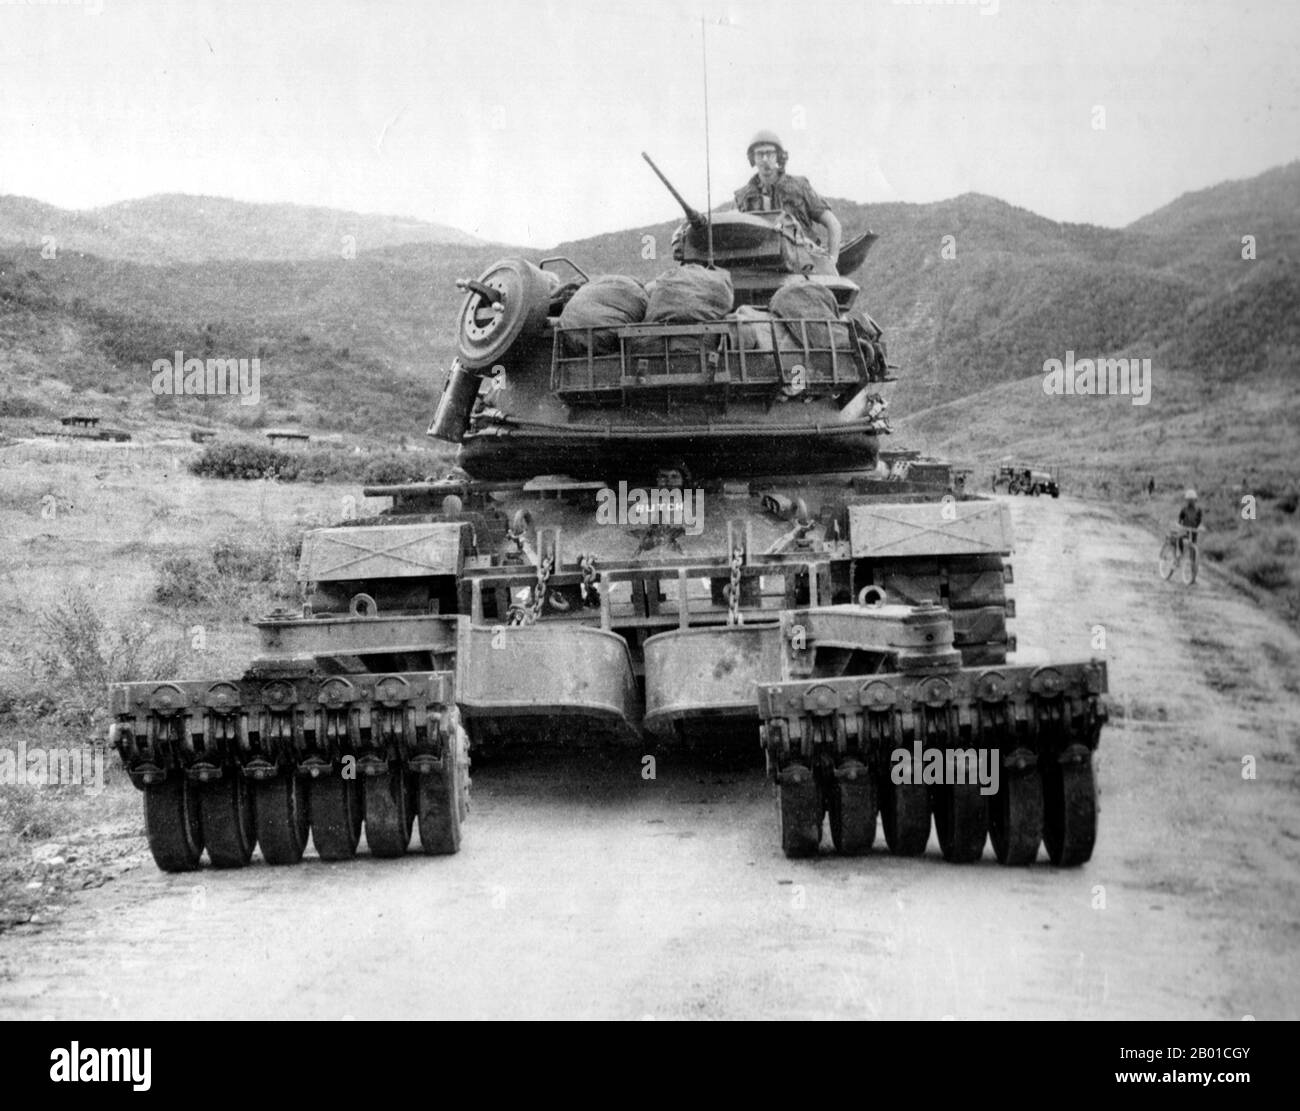 Vietnam: A tank-mounted mine roller on an M48 Patton clearing South Vietnam's Highway 19, c. 1966.  The Second Indochina War, known in America as the Vietnam War, was a Cold War era military conflict that occurred in Vietnam, Laos, and Cambodia from 1 November 1955 to the fall of Saigon on 30 April 1975. This war followed the First Indochina War and was fought between North Vietnam, supported by its communist allies, and the government of South Vietnam, supported by the U.S. and other anti-communist nations. Stock Photo